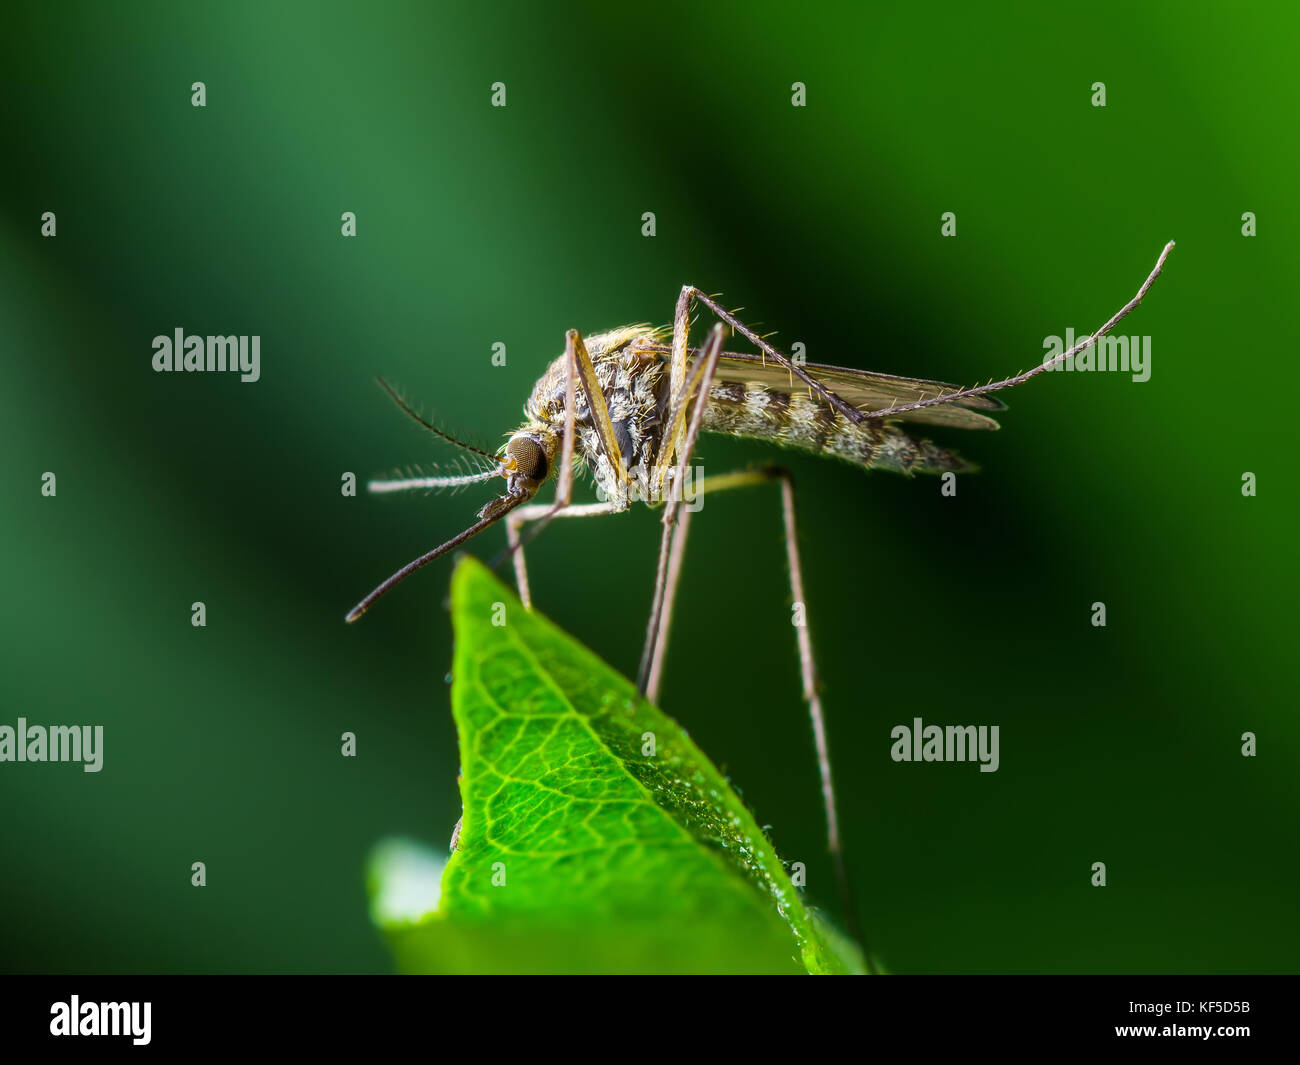 Yellow Fever, Malaria or Zika Virus Infection - Mosquito Insect on Leaf Stock Photo